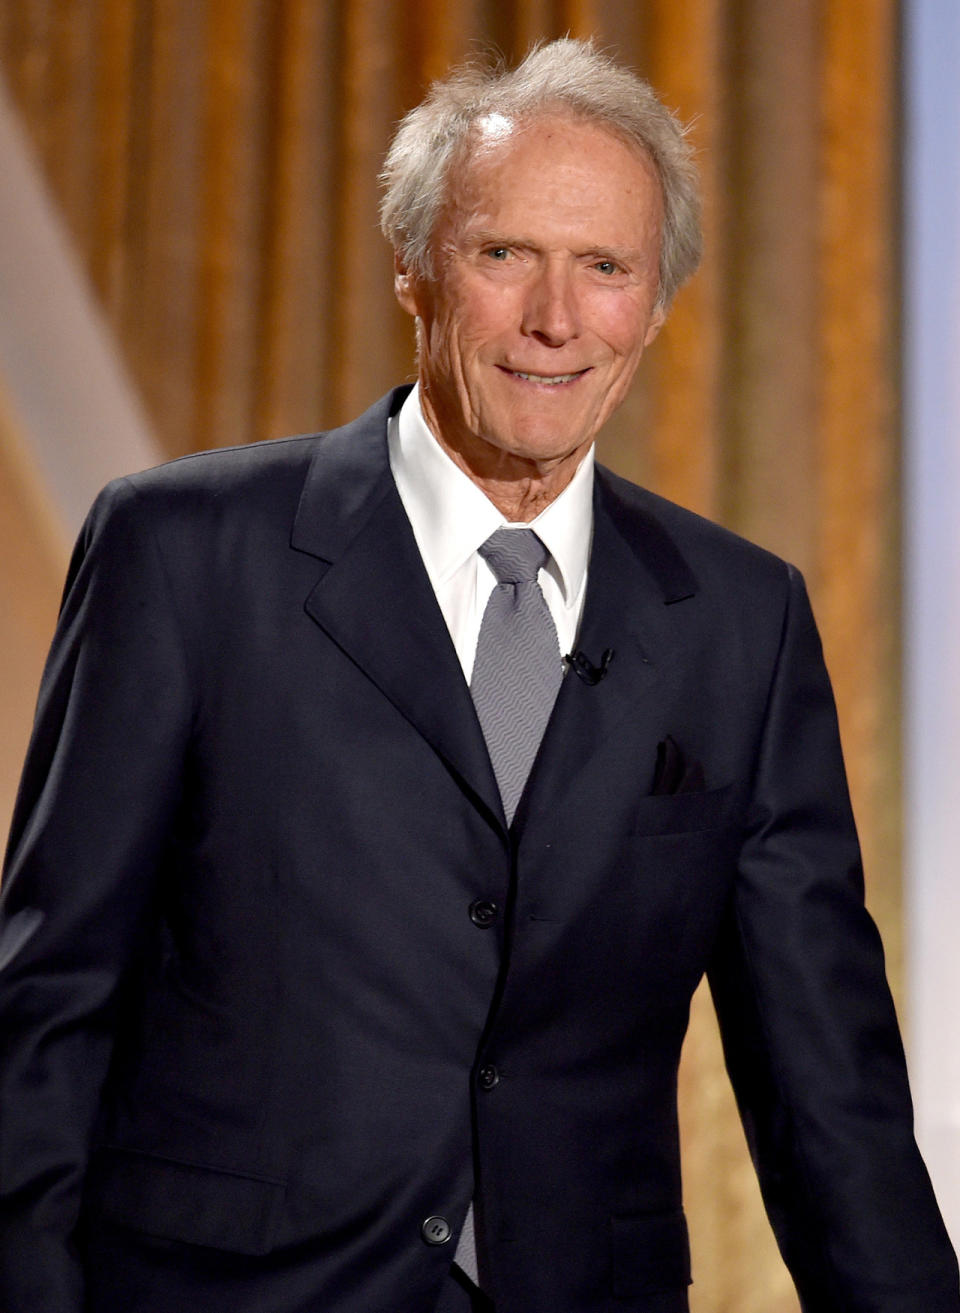 HOLLYWOOD, CA - NOVEMBER 08: Actor Clint Eastwood speaks onstage during the Academy Of Motion Picture Arts And Sciences’ 2014 Governors Awards at The Ray Dolby Ballroom at Hollywood & Highland Center on November 8, 2014 in Hollywood, California.